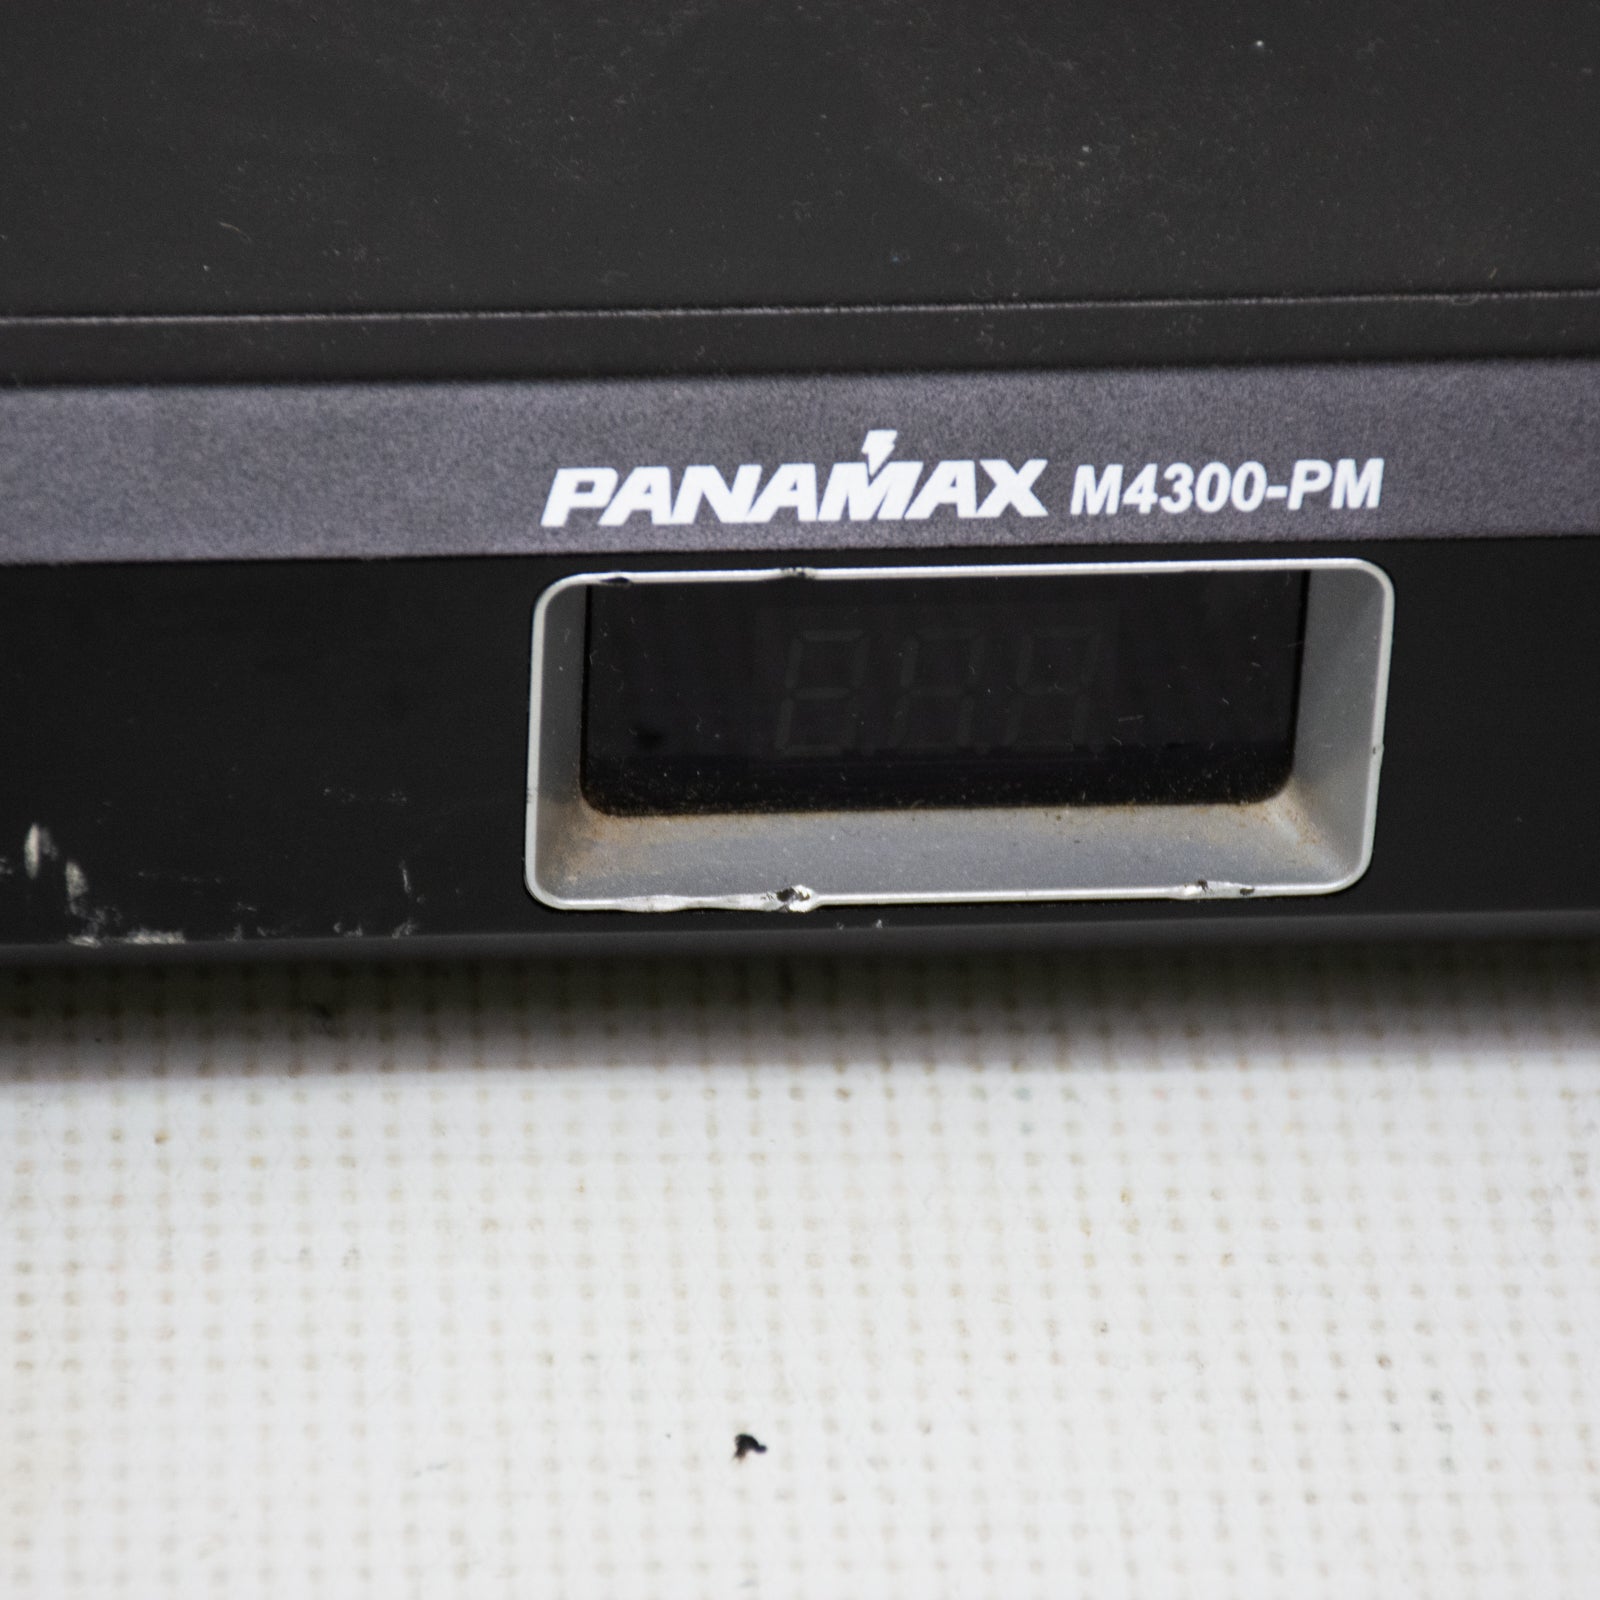 Panamax M4300-PM 8 Home Theater Power Line Conditioner and Surge Protector